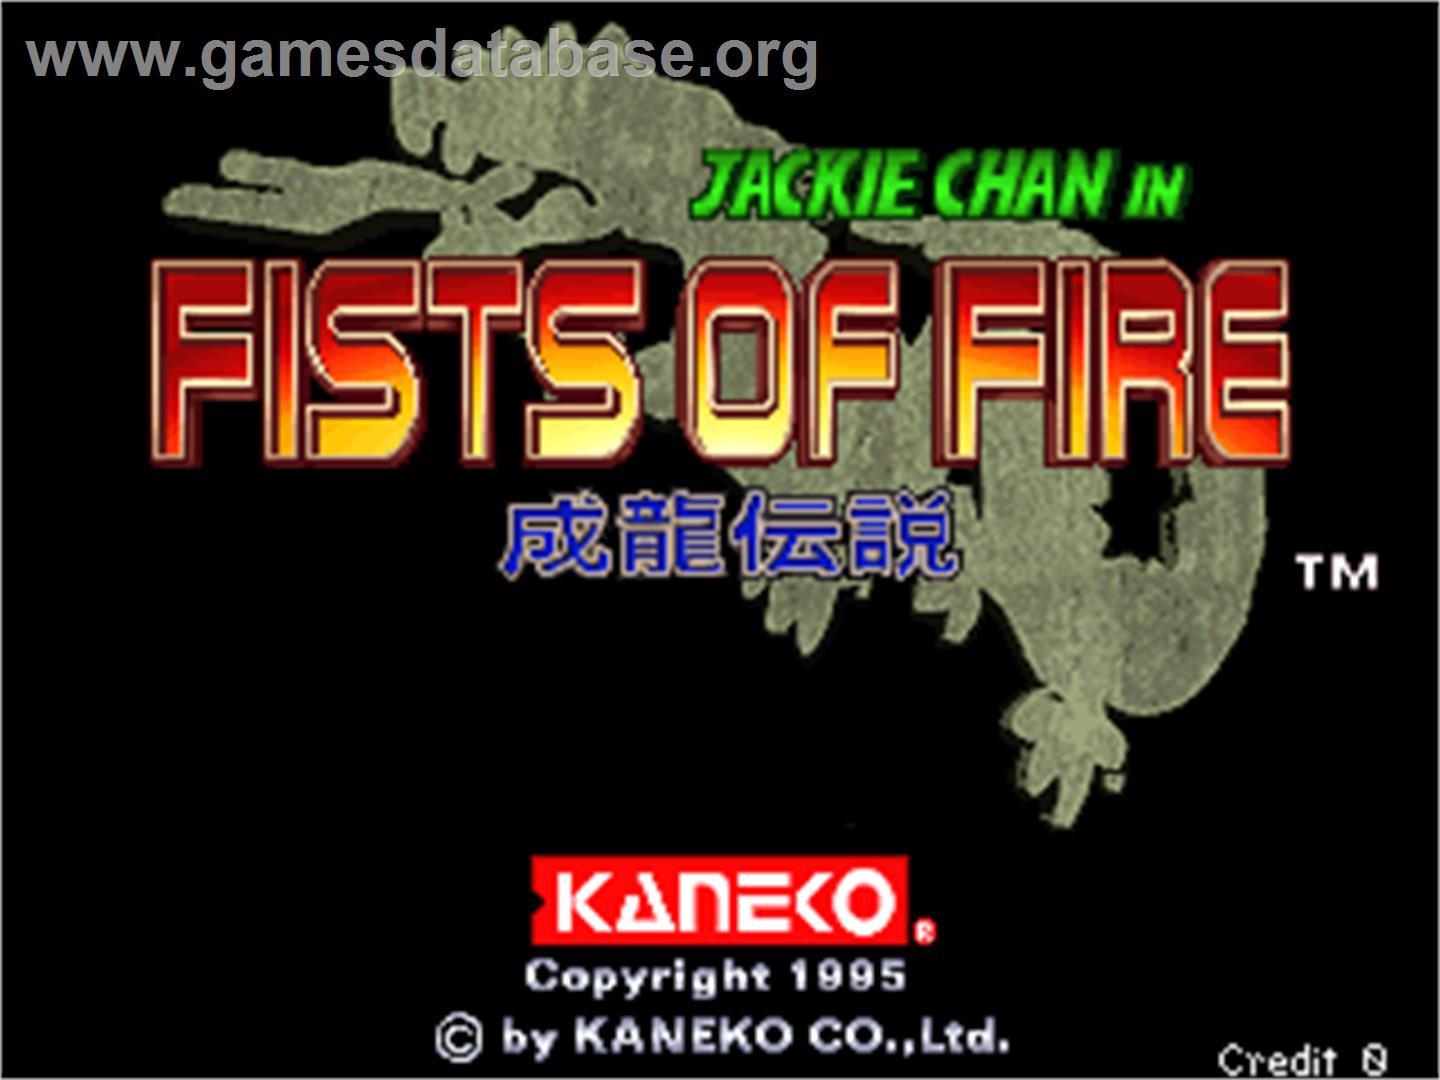 Jackie Chan in Fists of Fire - Arcade - Artwork - Title Screen